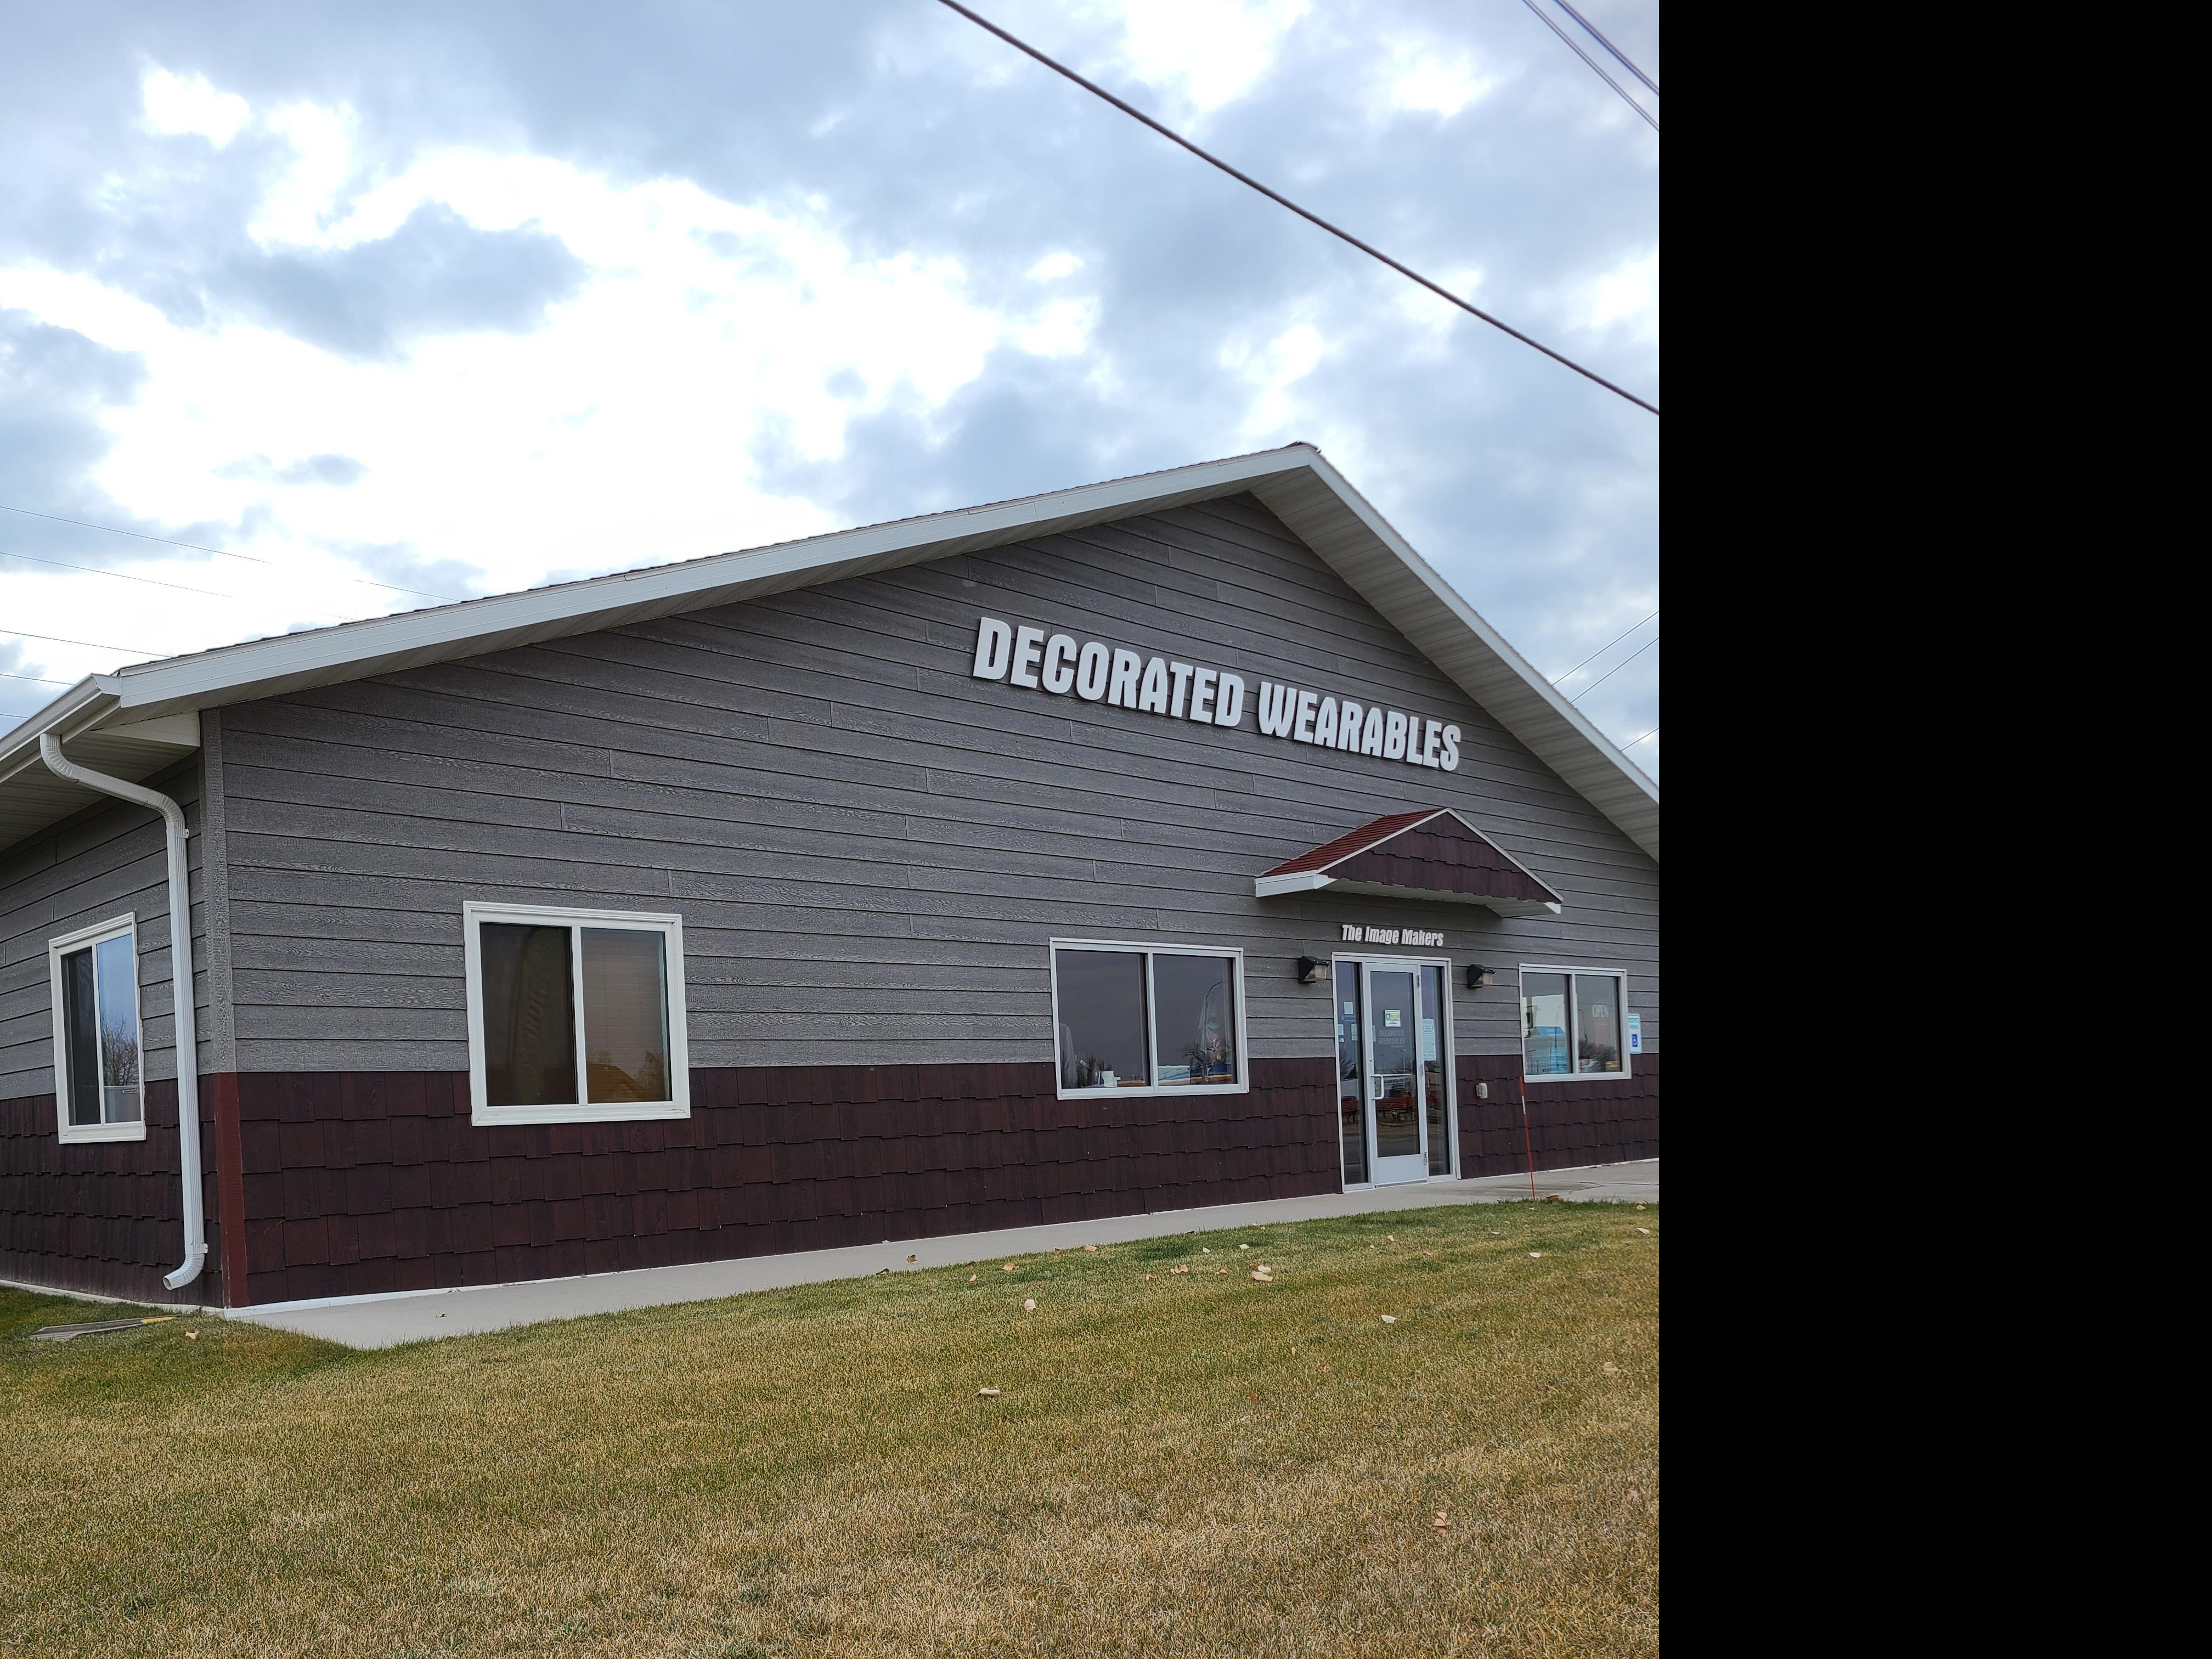 Tad Schmidt Builders offers customized commercial builds like Decorated Wearables' business building in Devils Lake, North Dakota.